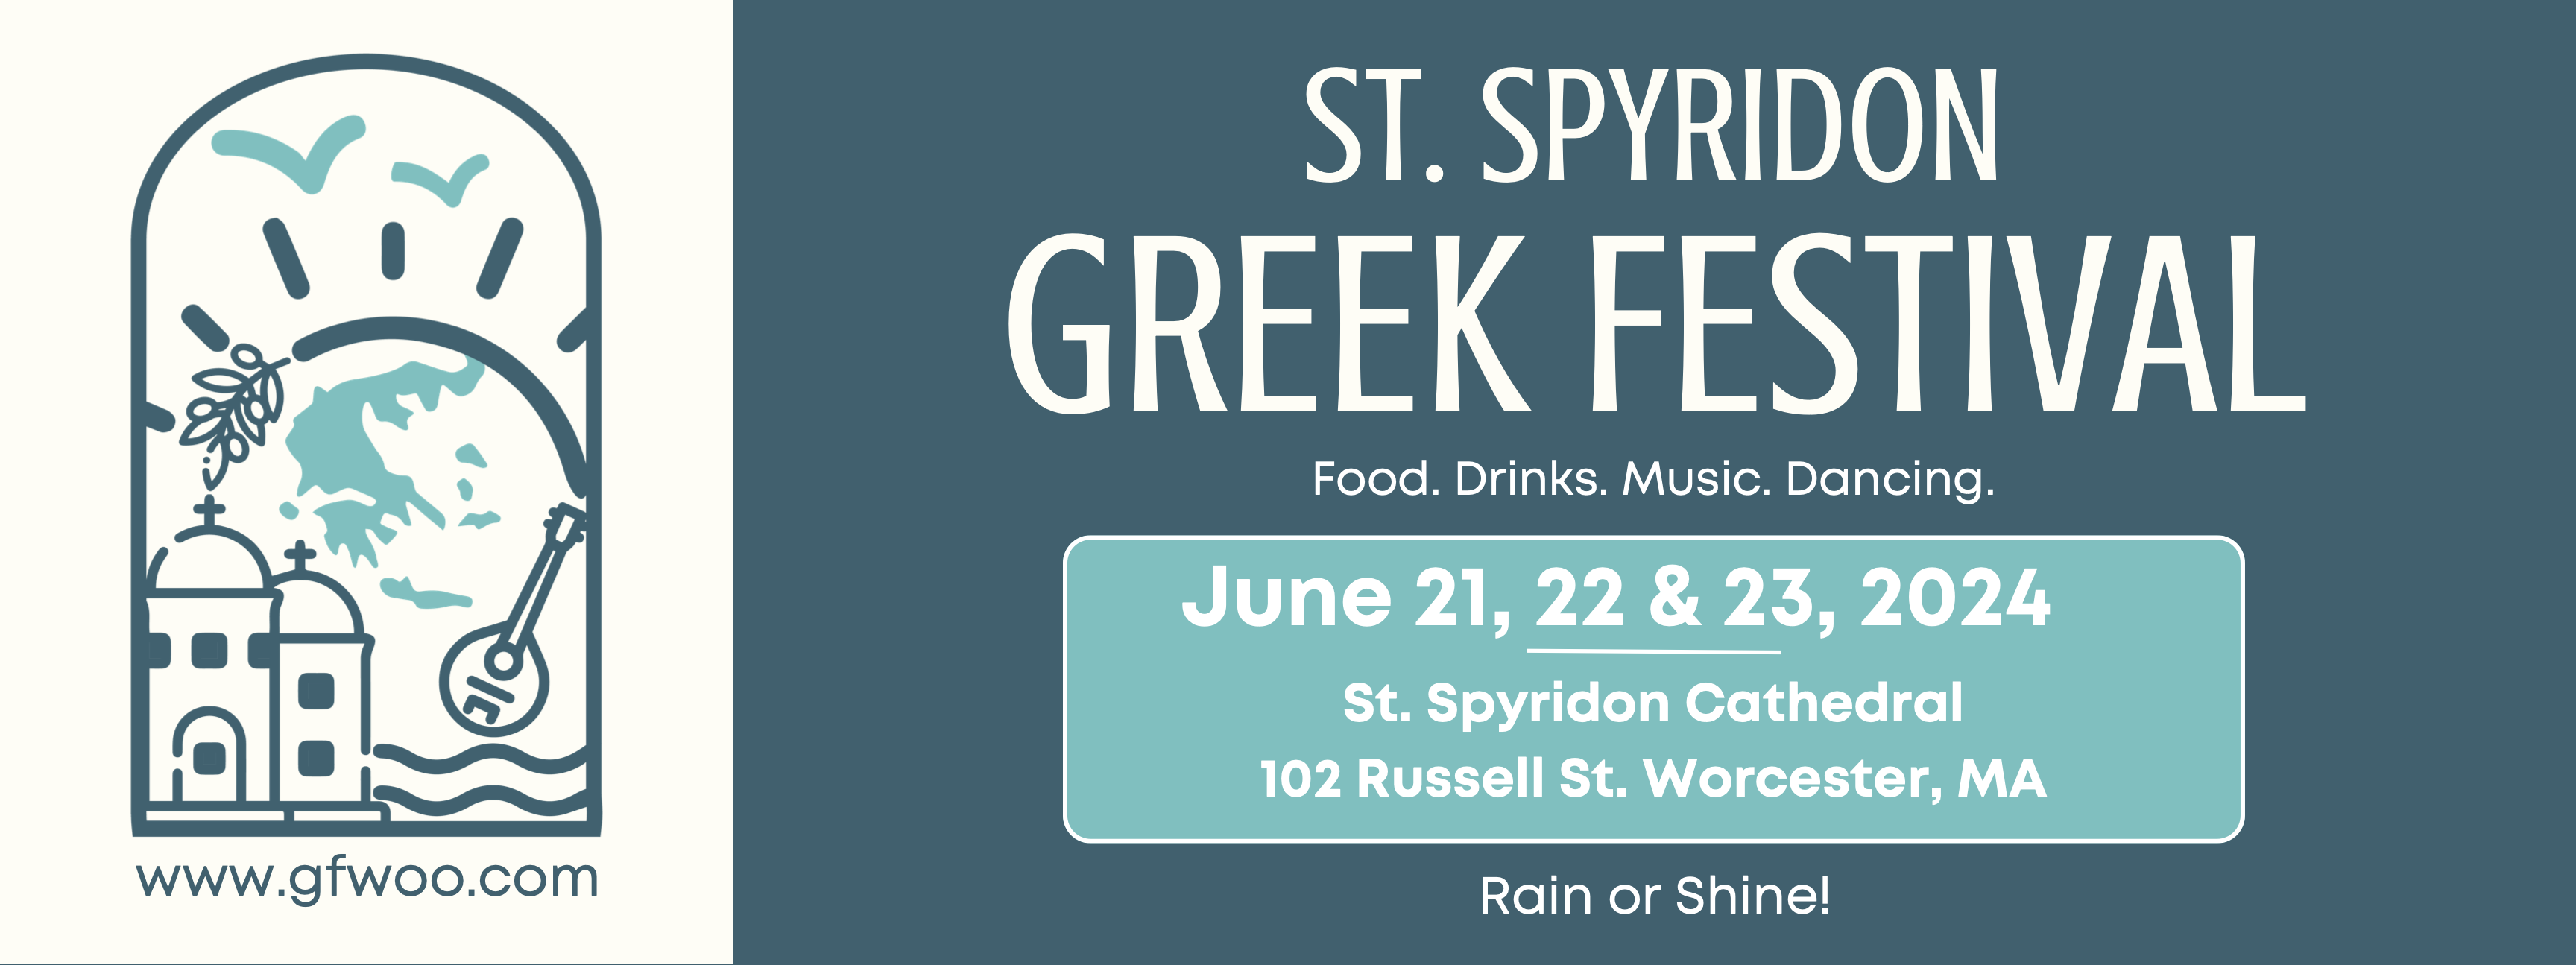 Promo Print Plus Partners with St. Spyridon Greek Festival for a Memorable Cultural Event in Worcester